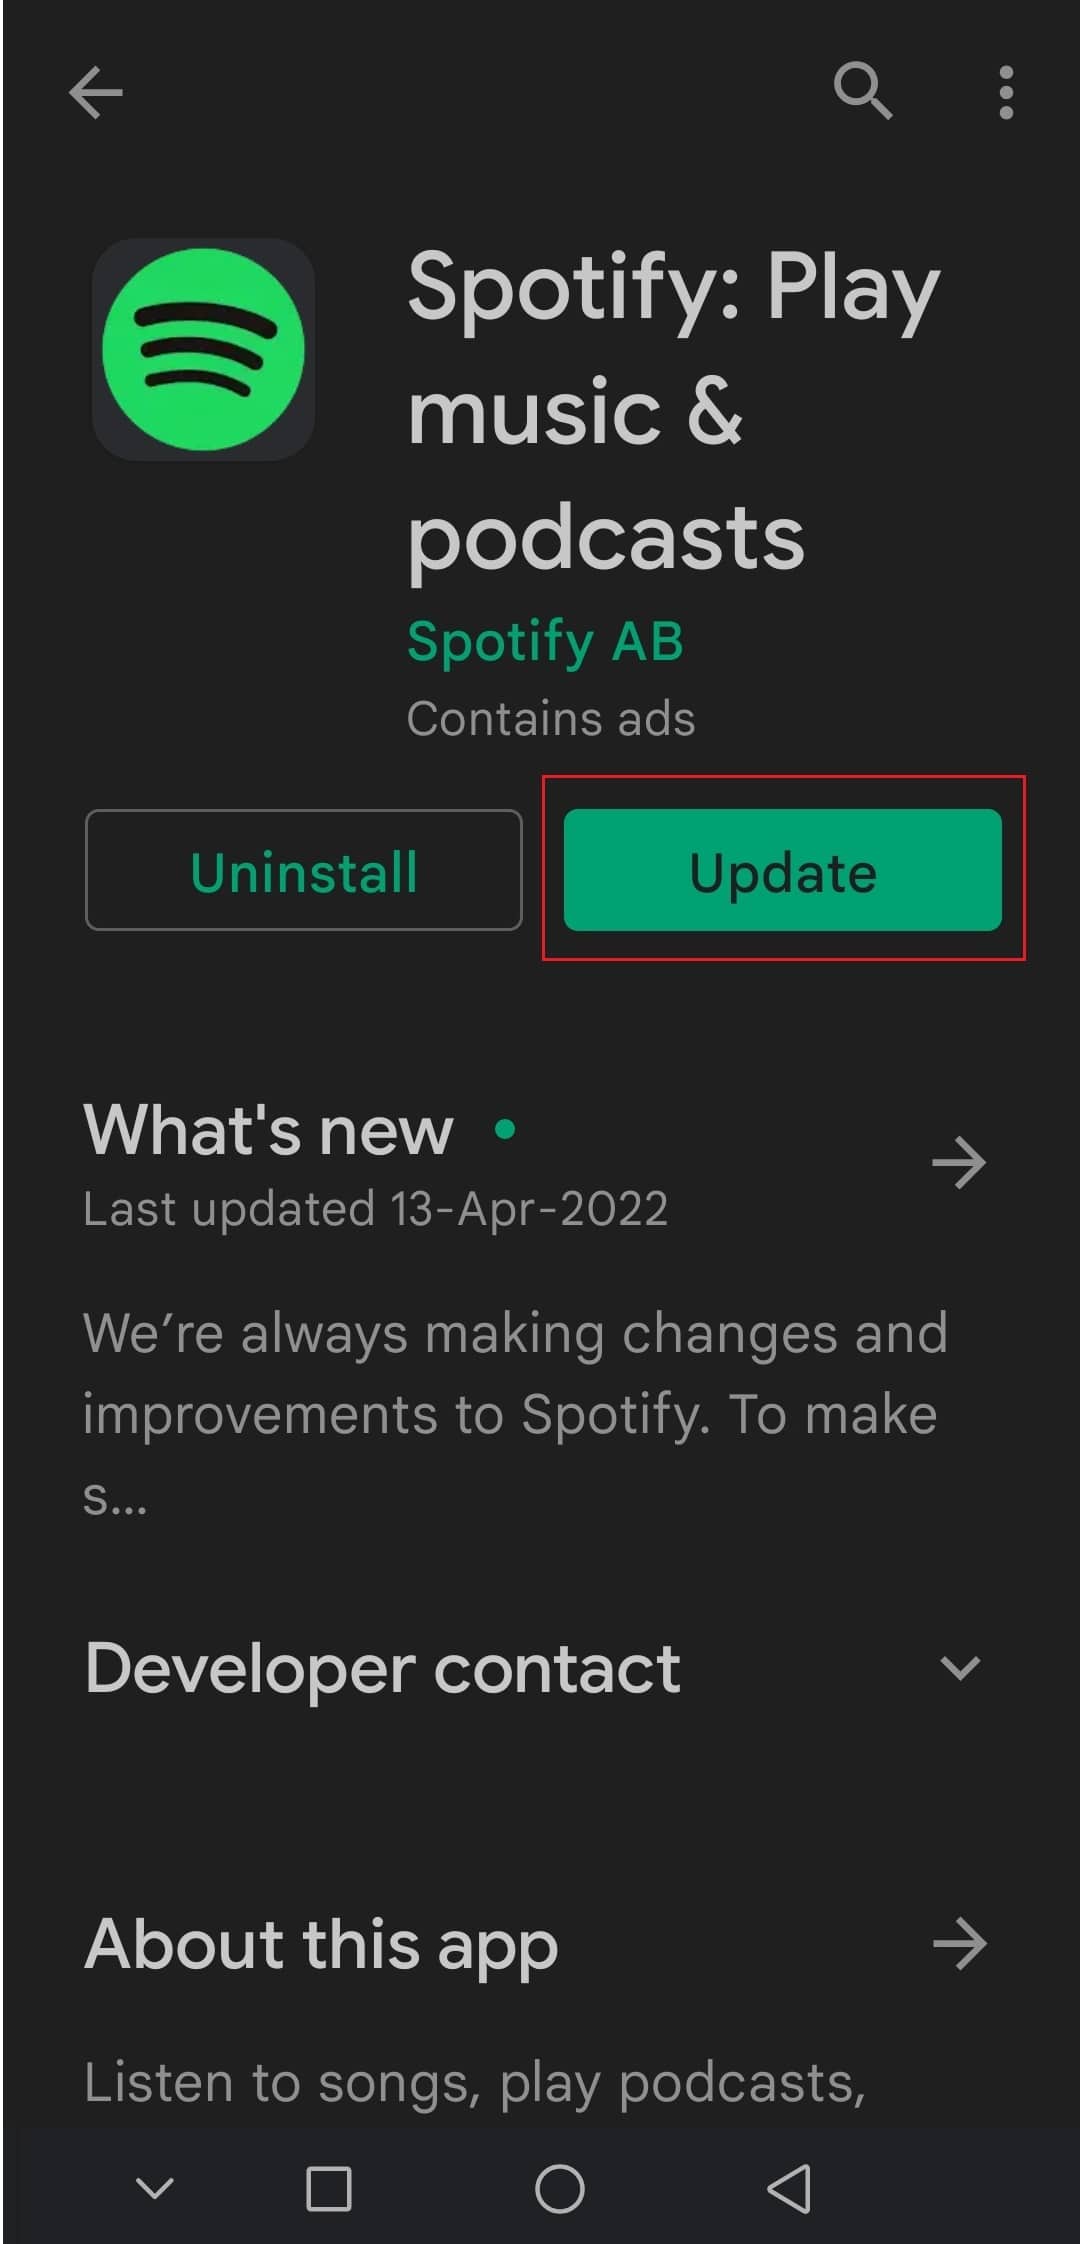 tap on Update option in Spotify Google Play Store on Android